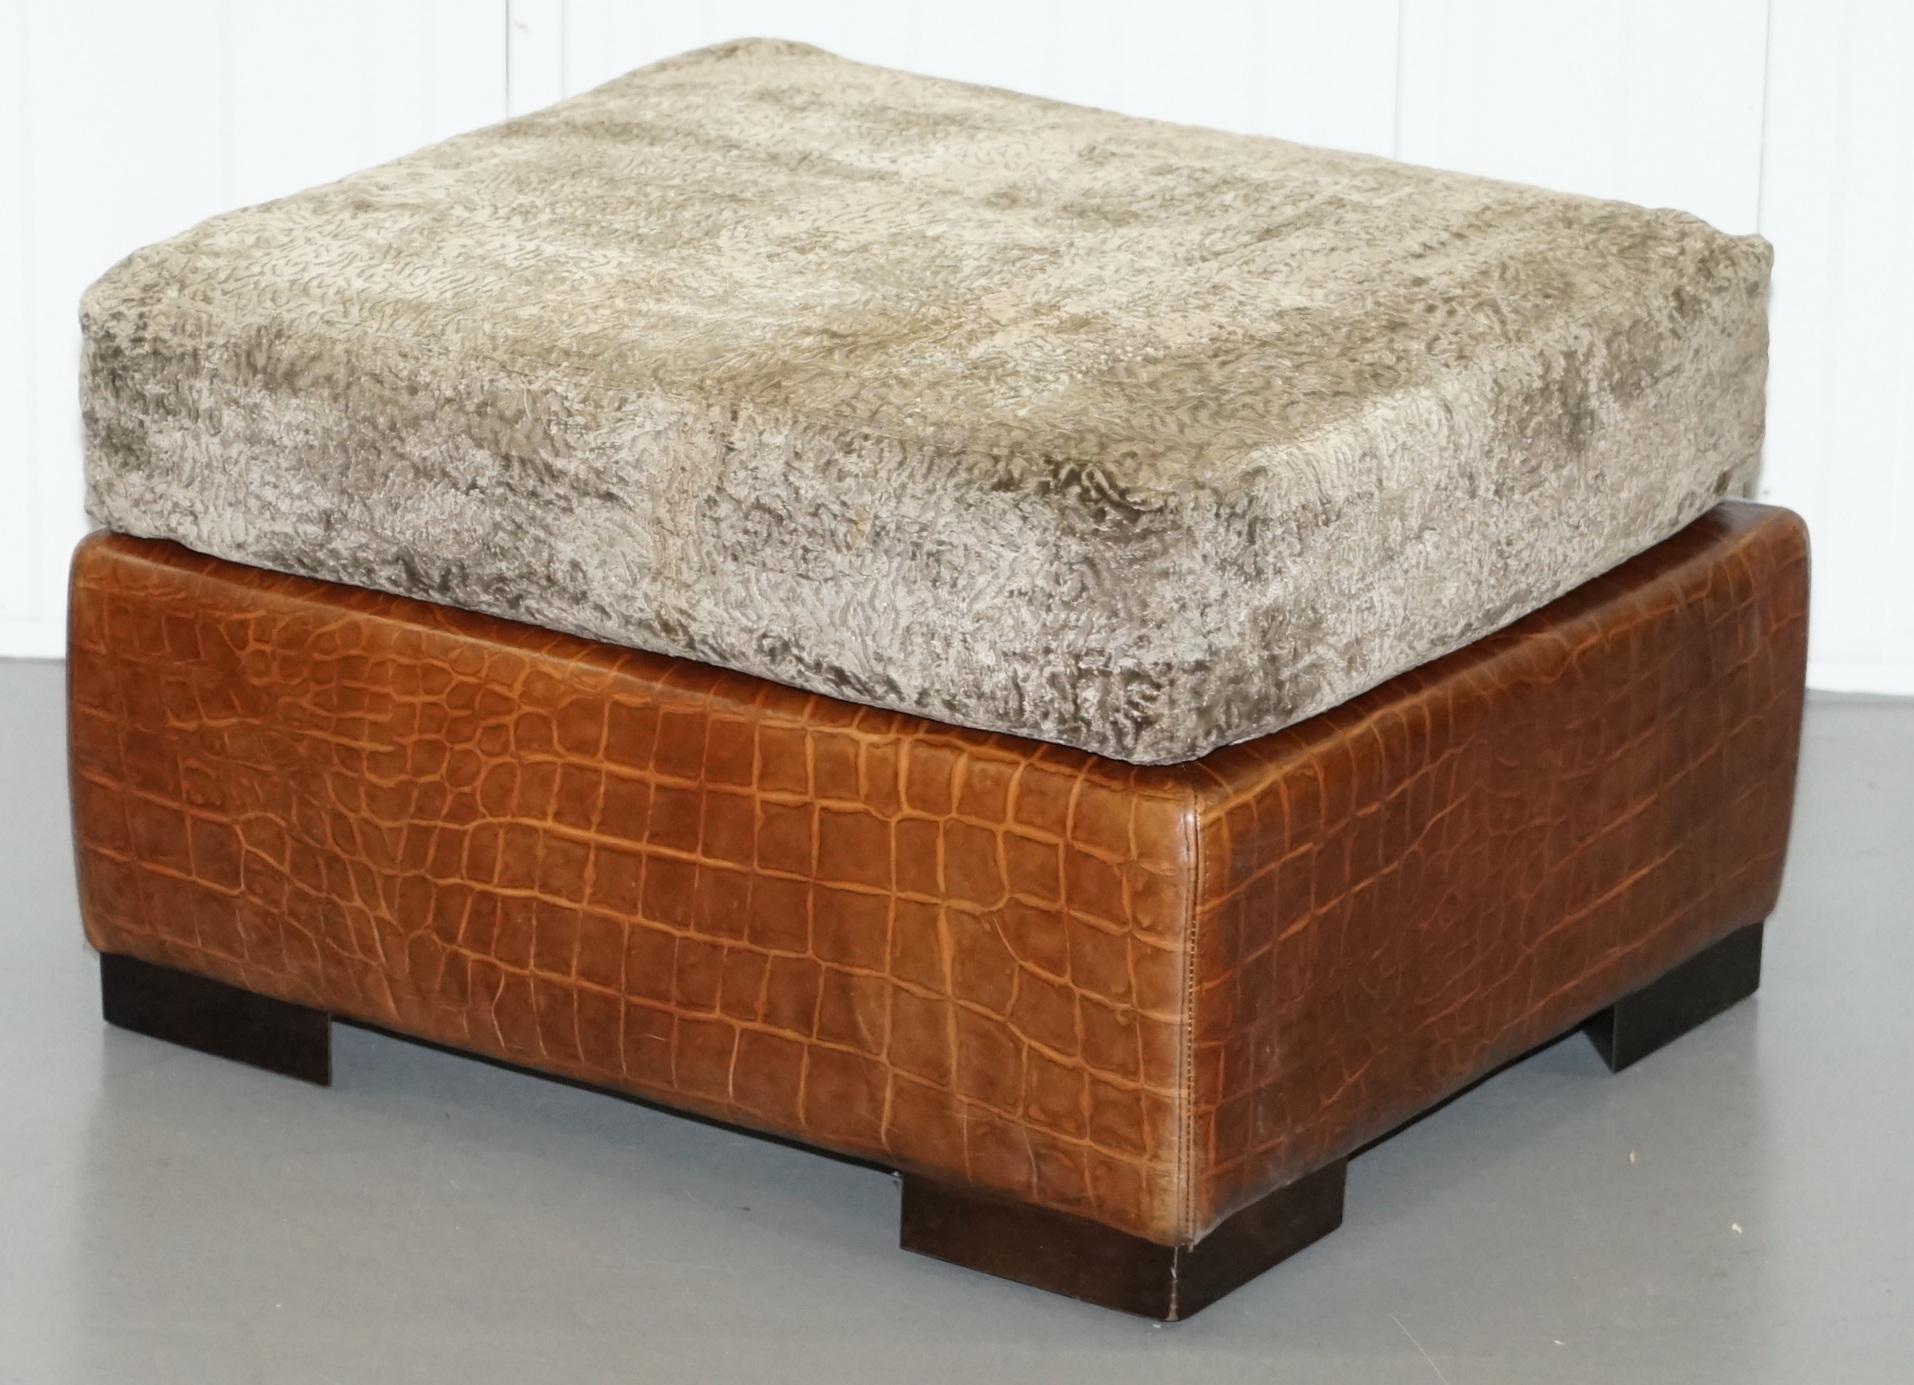 We are delighted to offer for sale this stunning pair of Fendi casa crocodile leather patina footstools RRP £5000

These are very comfortable and exceptionally good looking, they were commissioned by Interdecor Design SL in Valencia Spain through